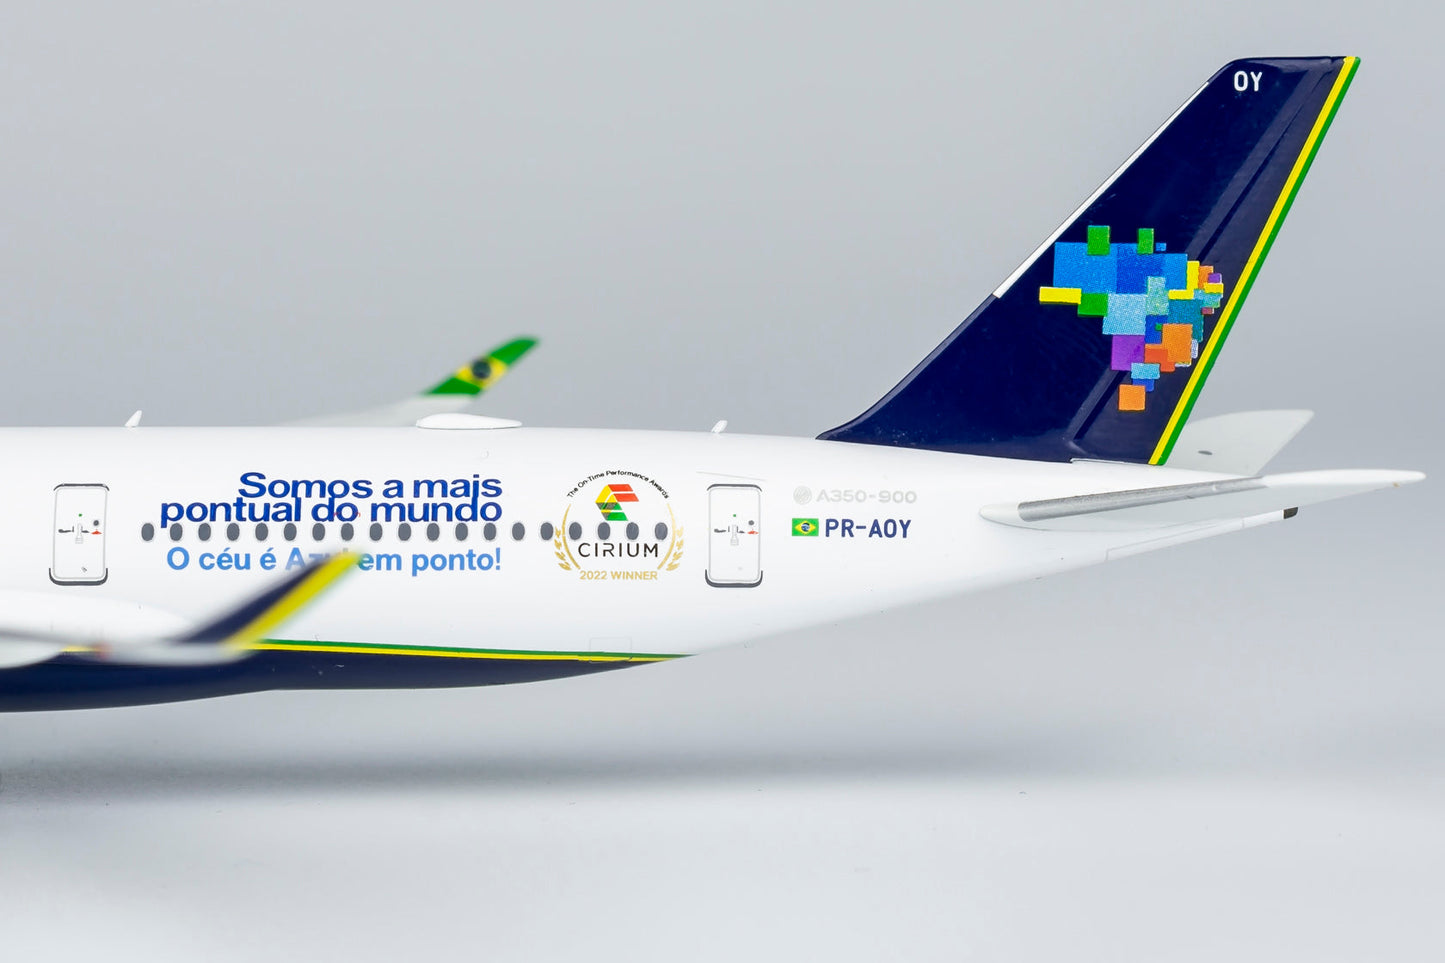 1:400 Azul A350-900 "The Most On-Time Performance Awards 2022 Winner" NG Models.